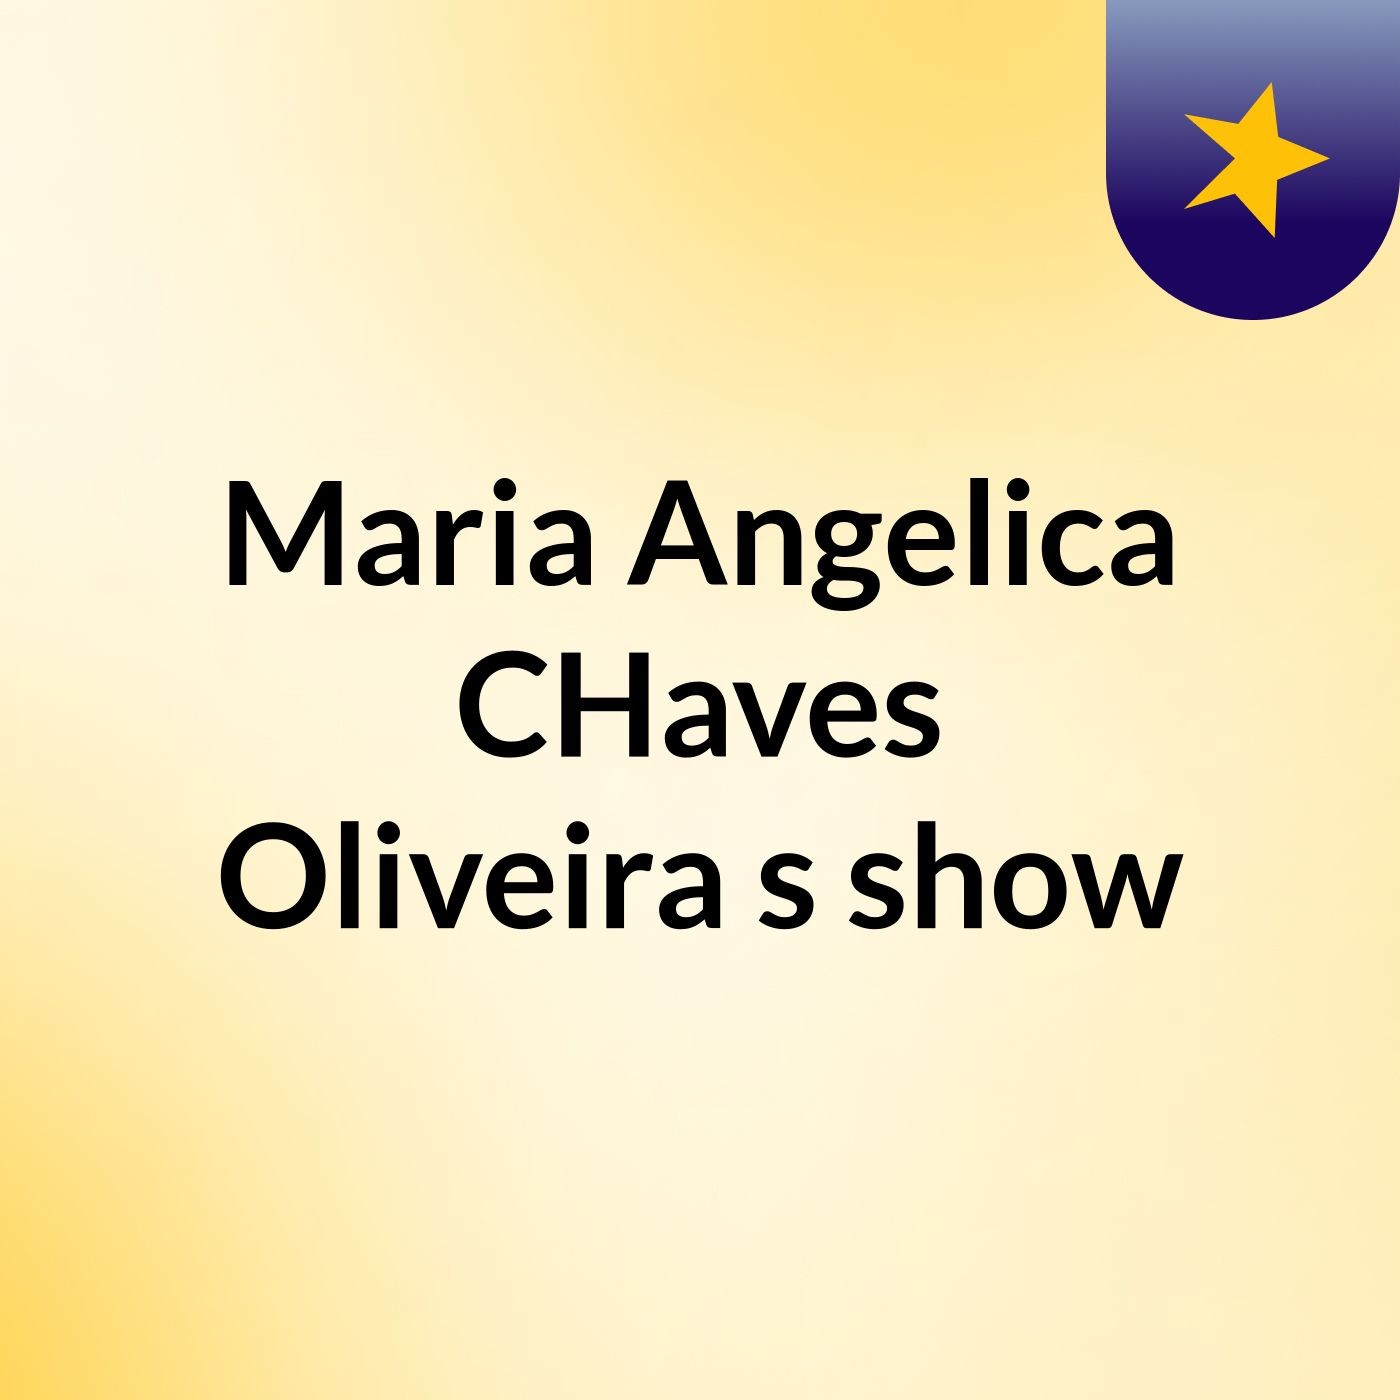 Maria Angelica CHaves Oliveira's show